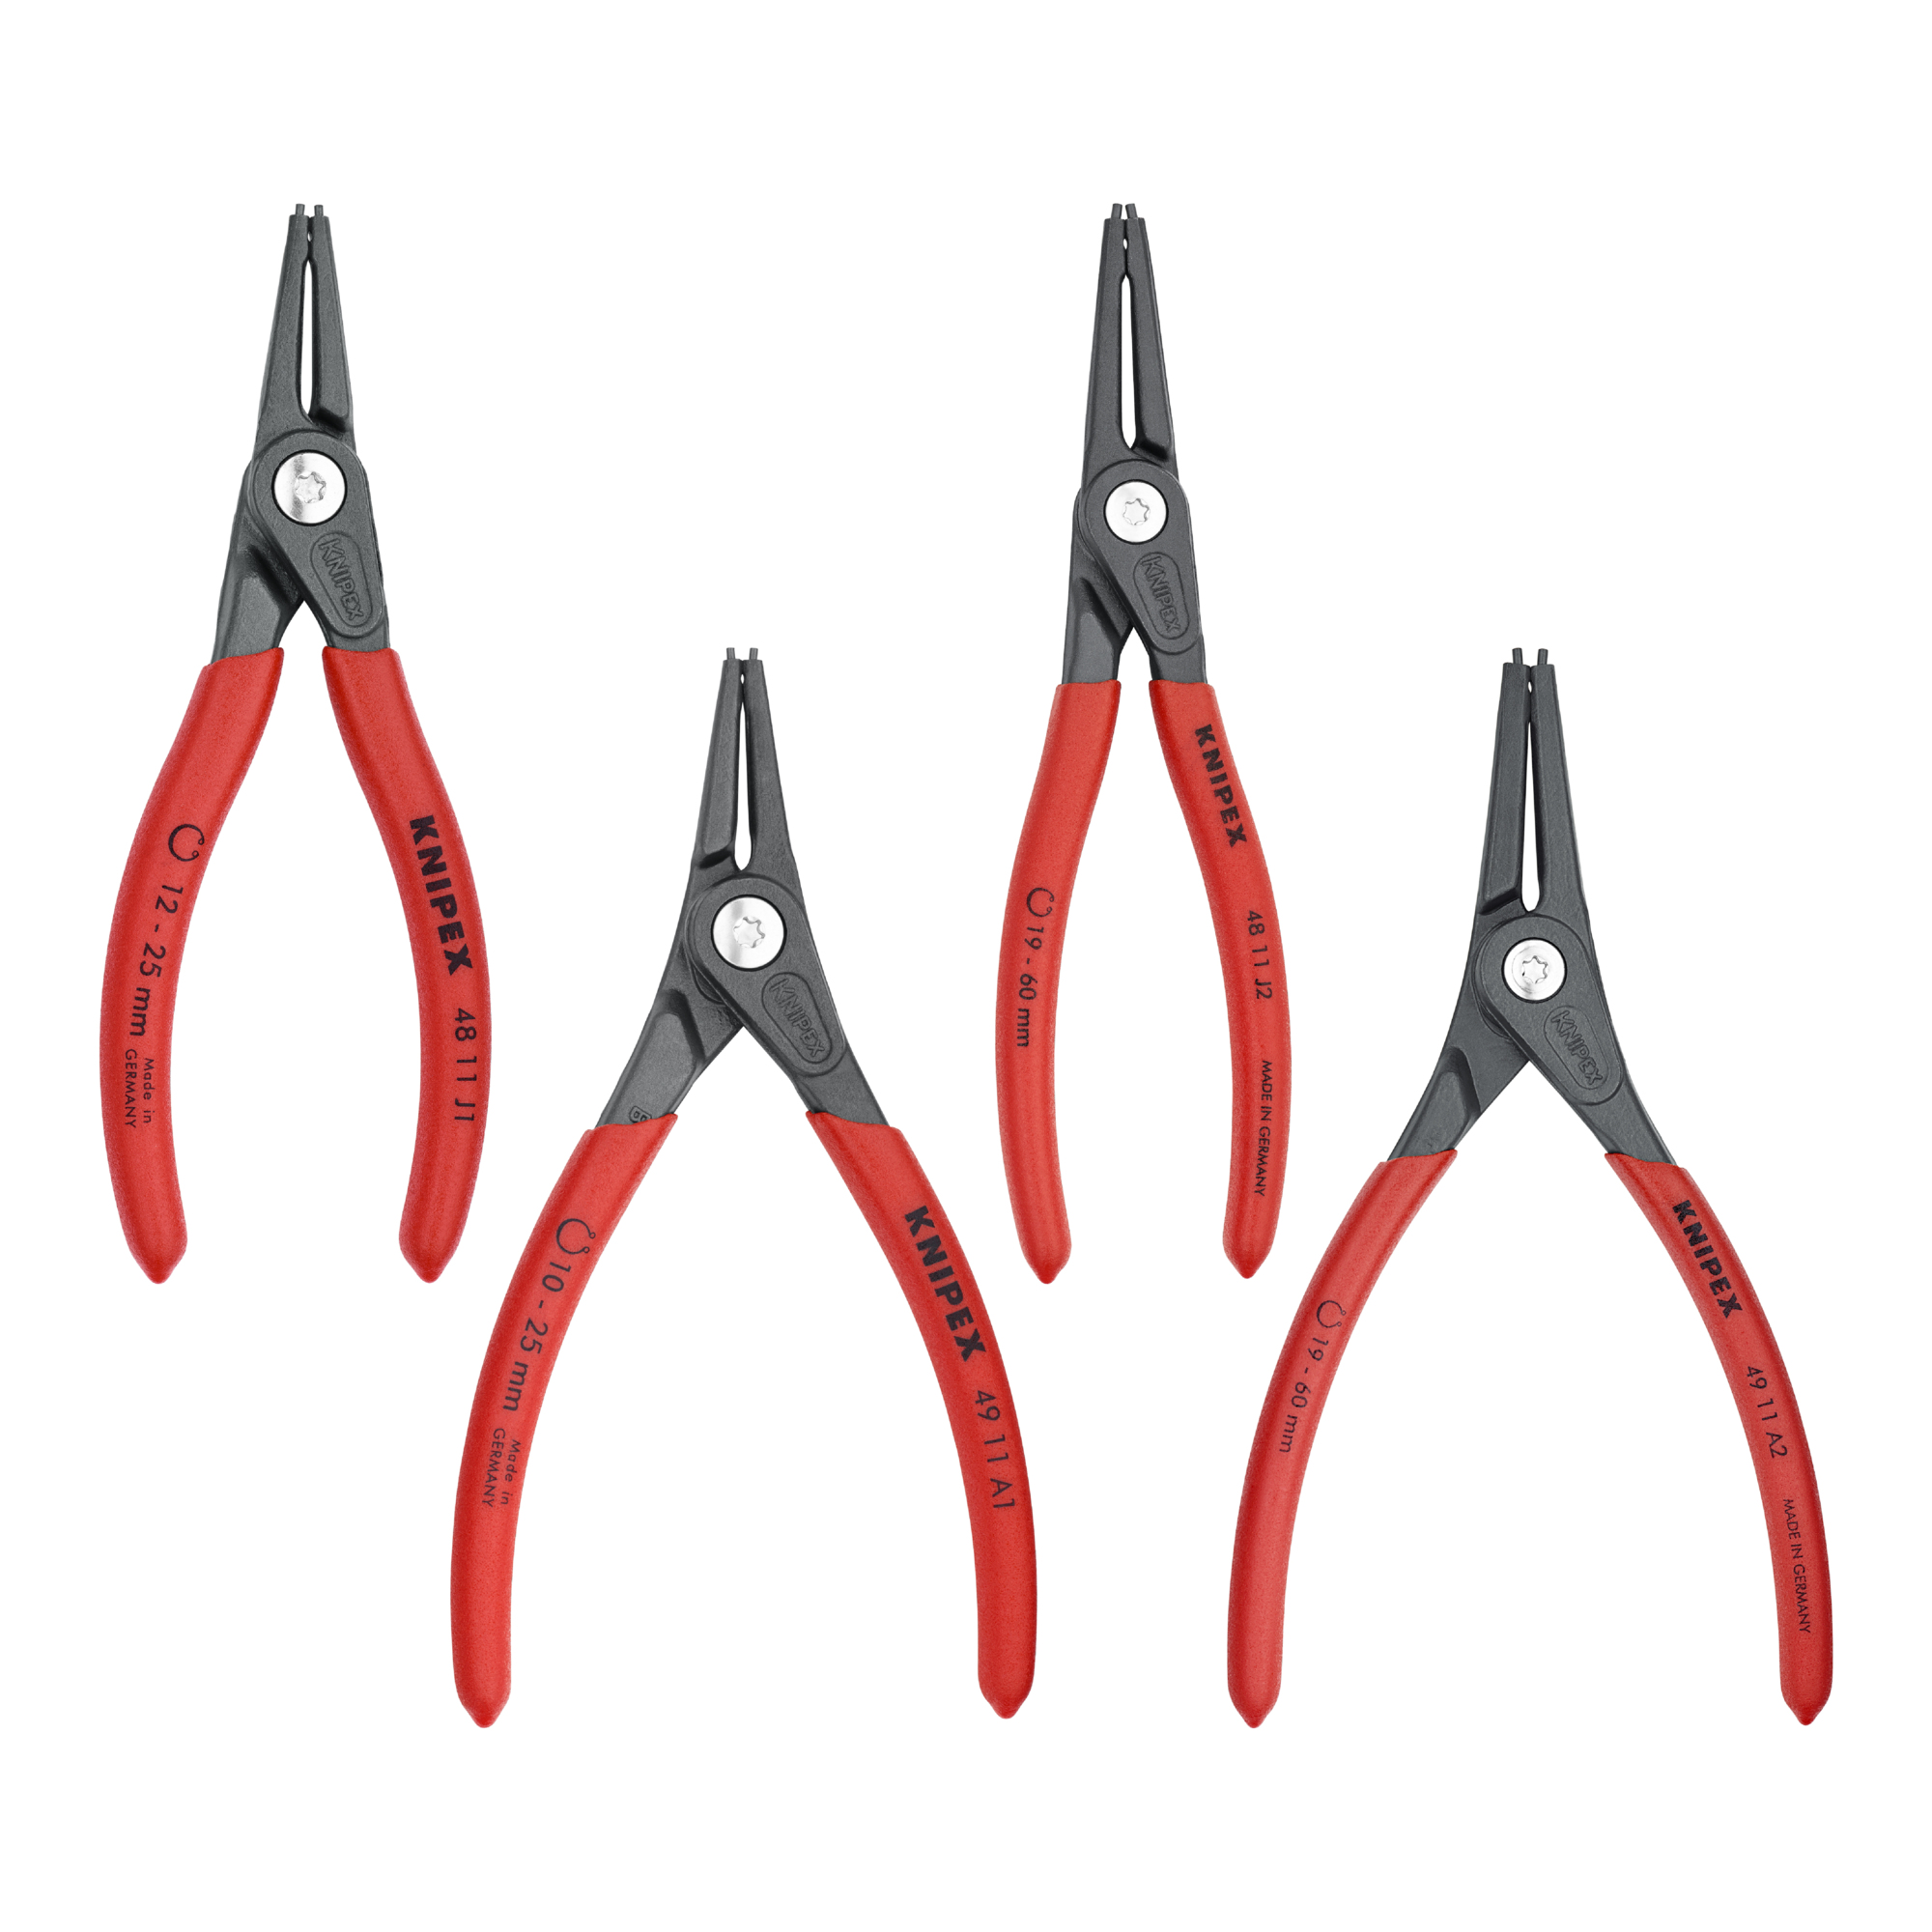 KNIPEX, Precision Snap Ring Pliers Set, 4 Pc, Pieces (qty.) 4 Material Steel, Model 00 20 03 SB